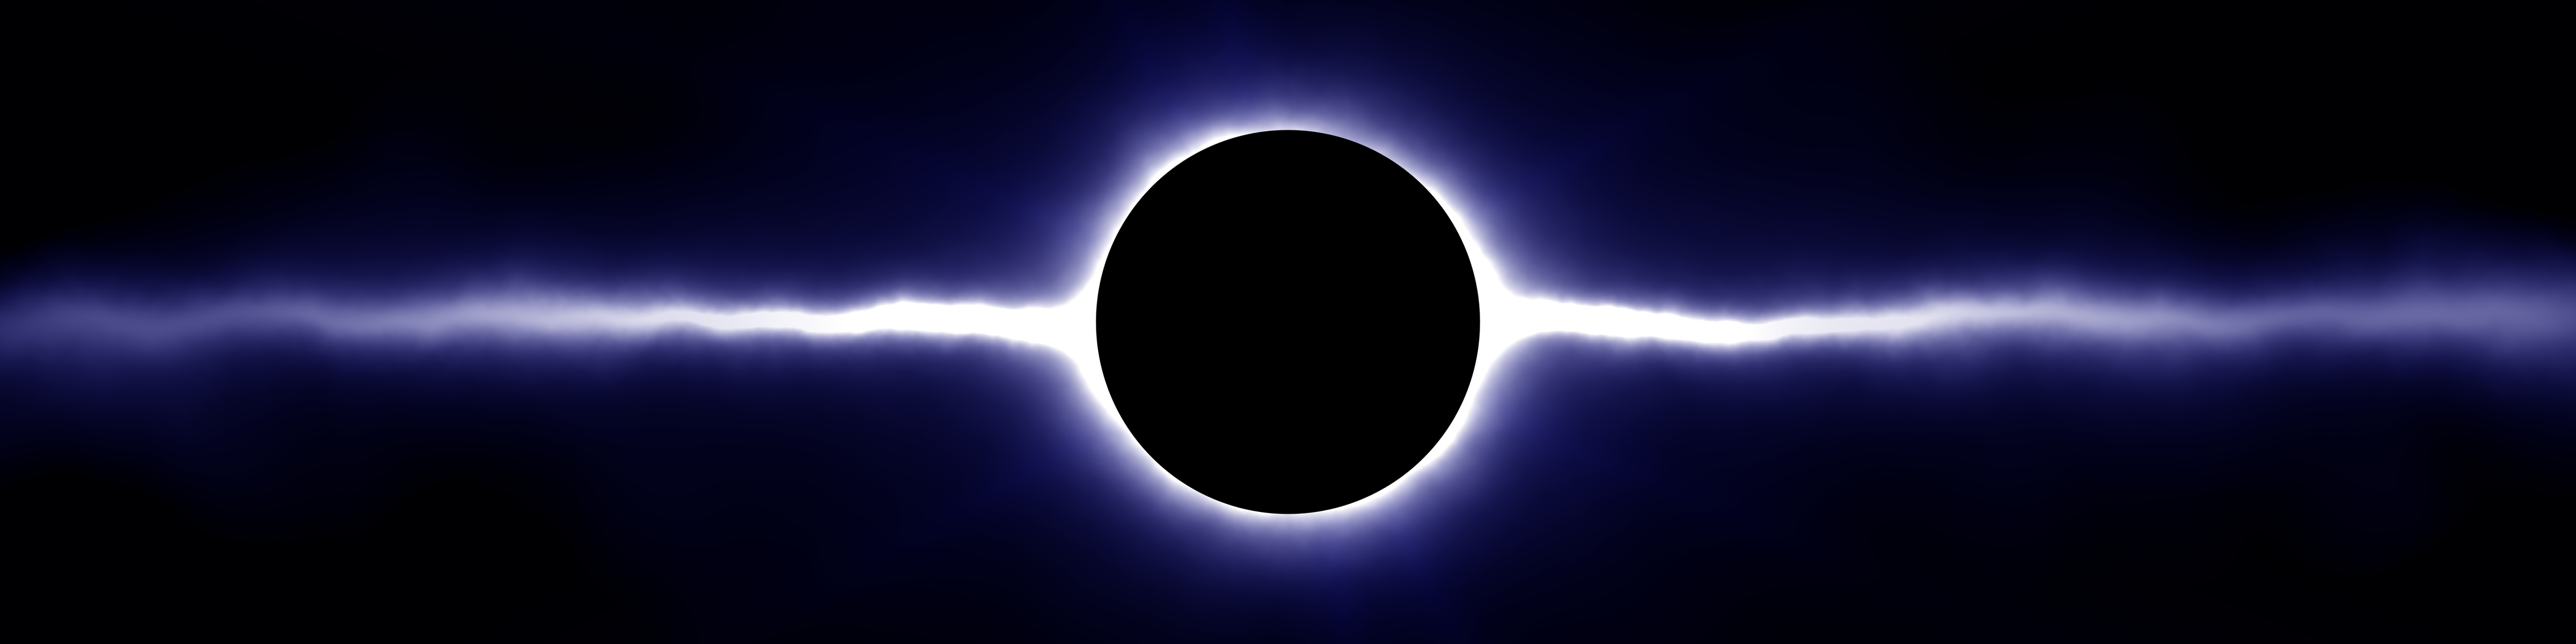 Space Eclipse 4800x1200